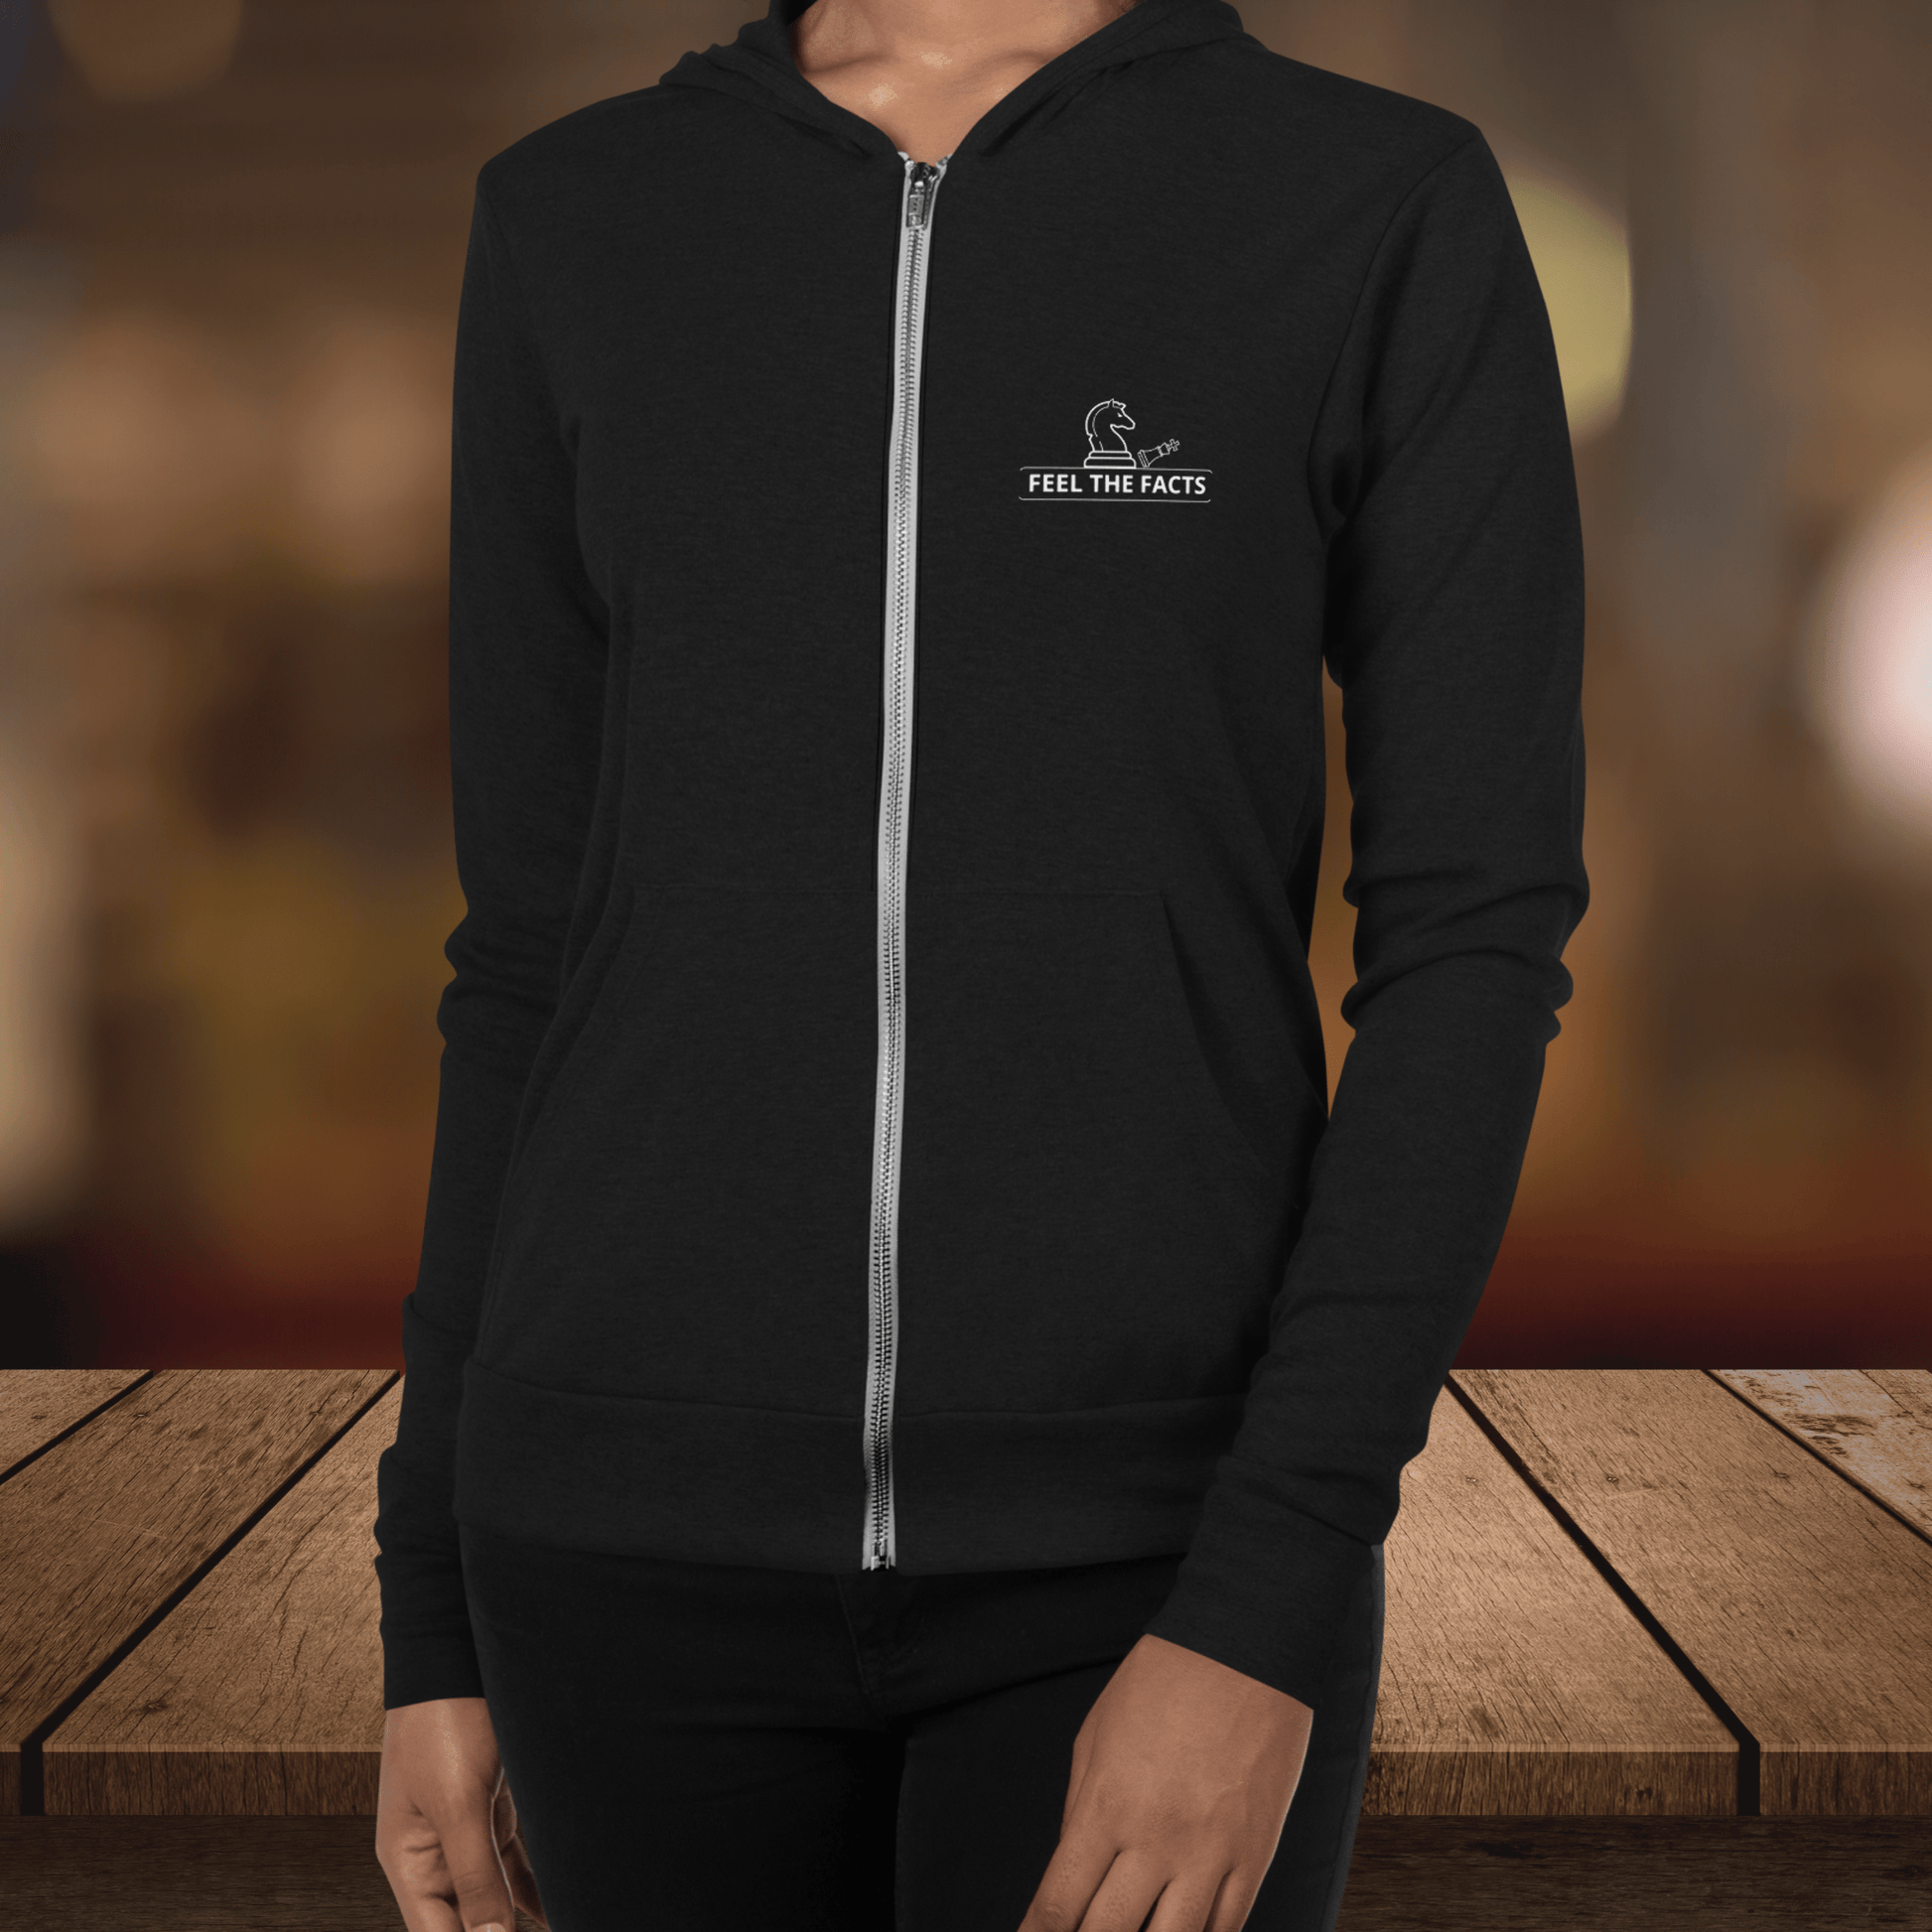 You are enough| hoodie| zip up| cognitive lifestyle| Feel the Facts